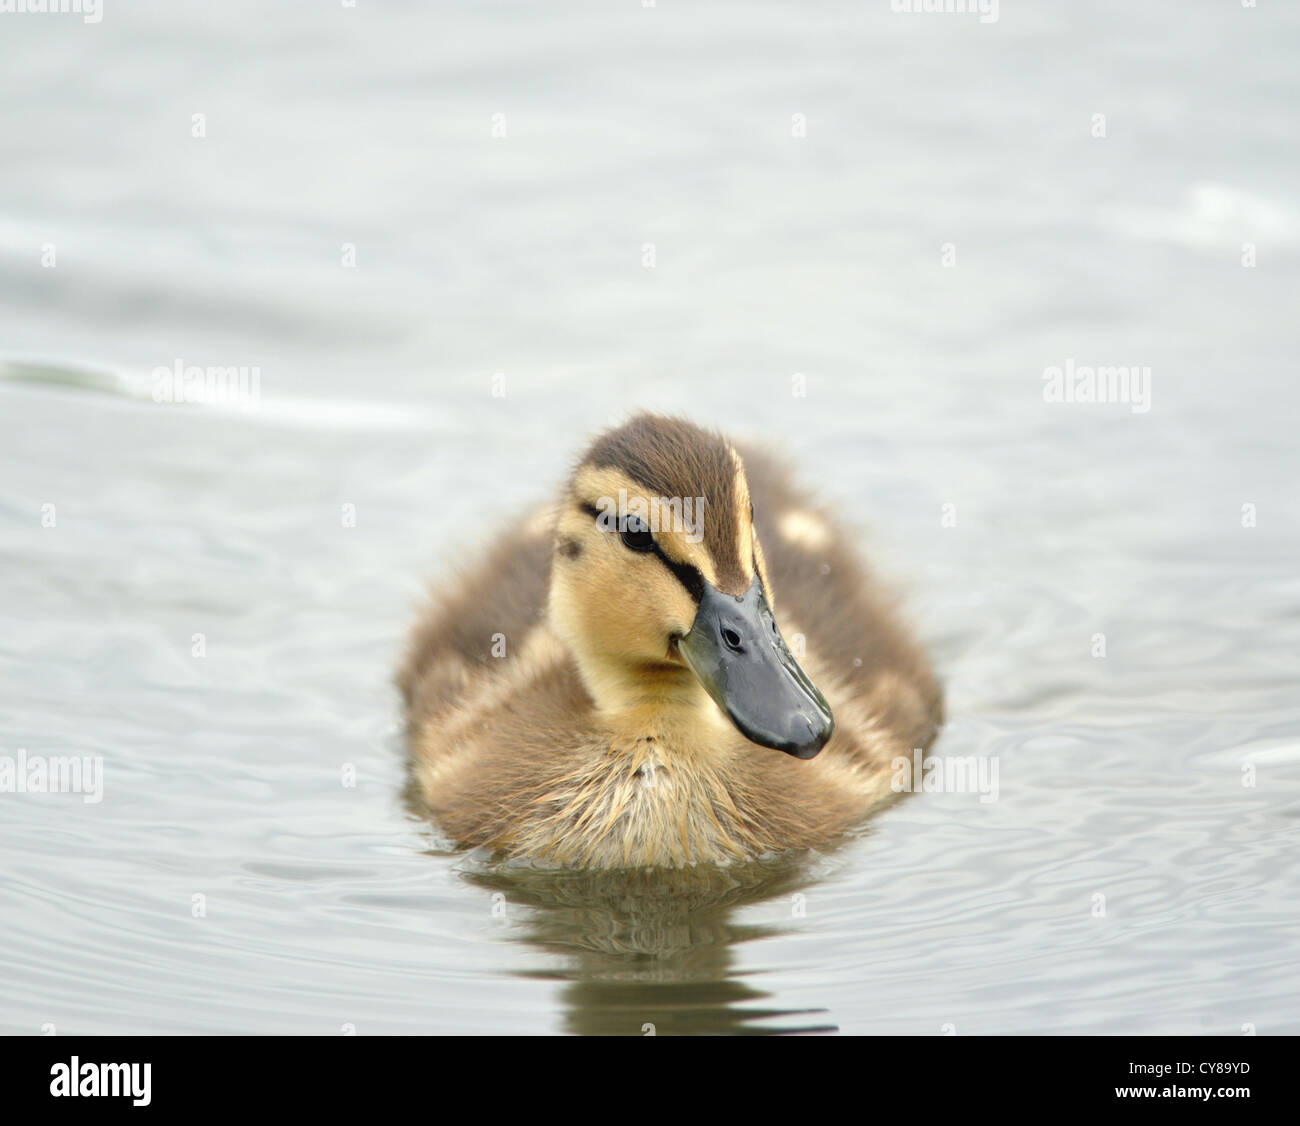 a close up of a baby Mallard duckling swimming Stock Photo